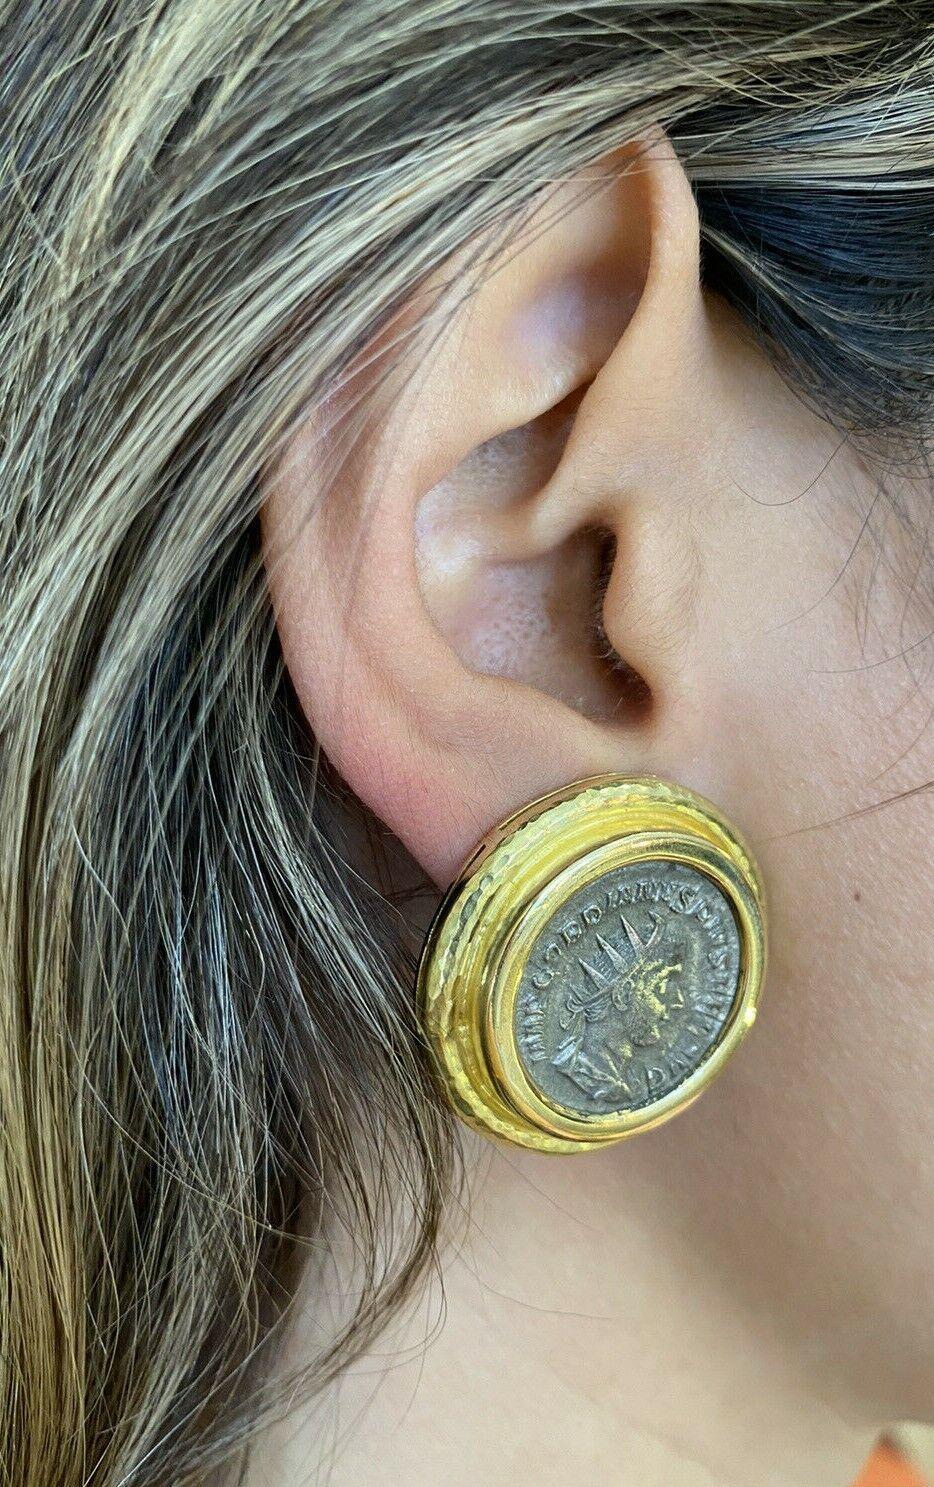 Large Elizabeth Locke Coin Button Earrings in 18k Yellow Gold In Excellent Condition For Sale In La Jolla, CA